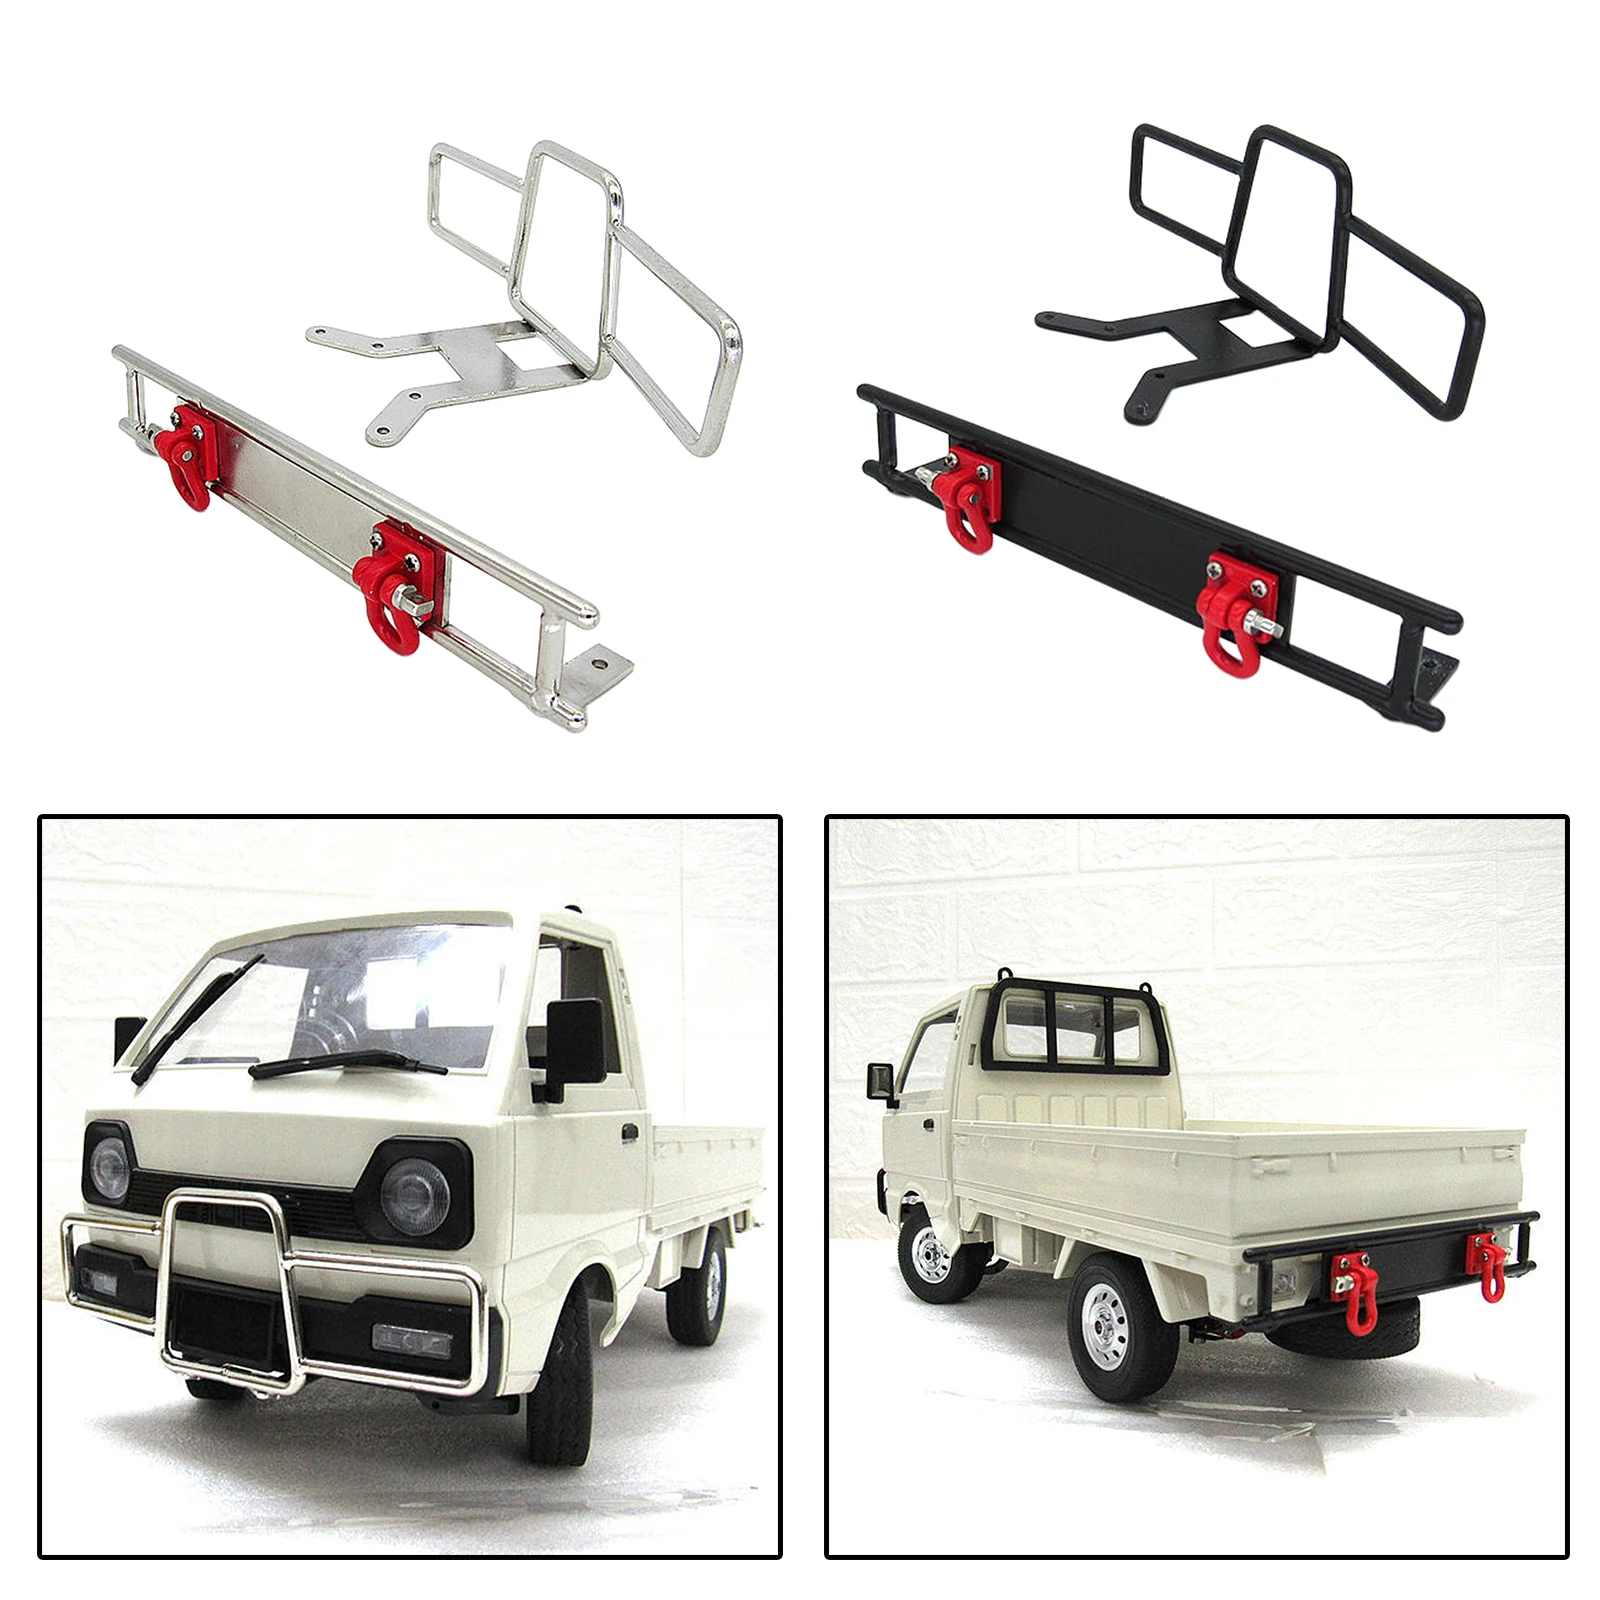 1/10 Scale Front Rear Bumper Set, Metal Bull Bar with Hook Hanger Mount Seat for